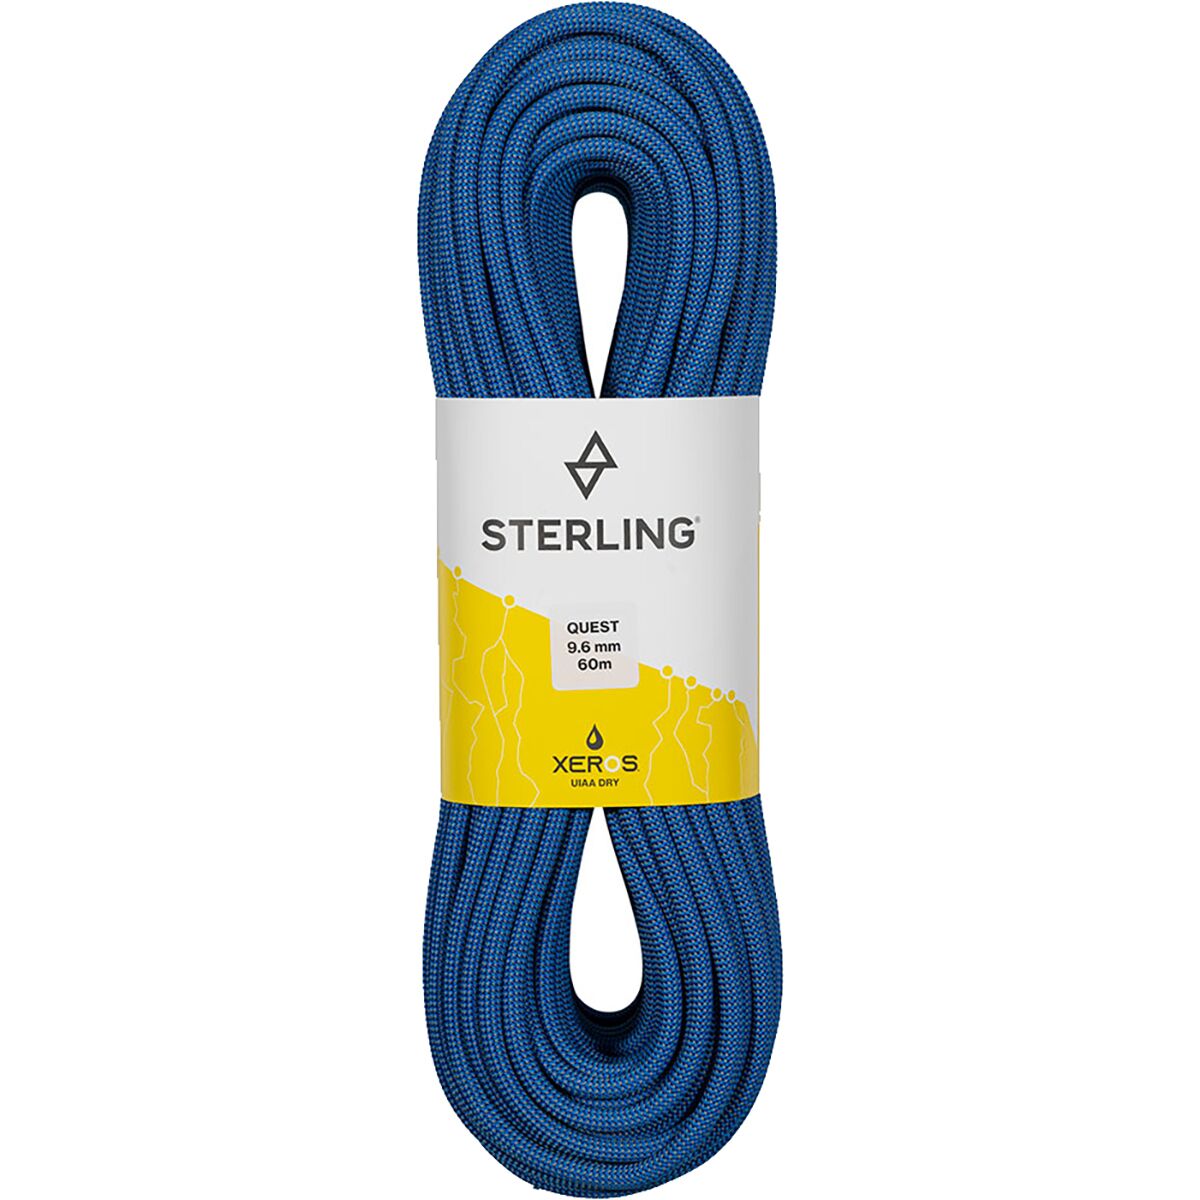 Sterling Quest 9.6 XEROS Rope